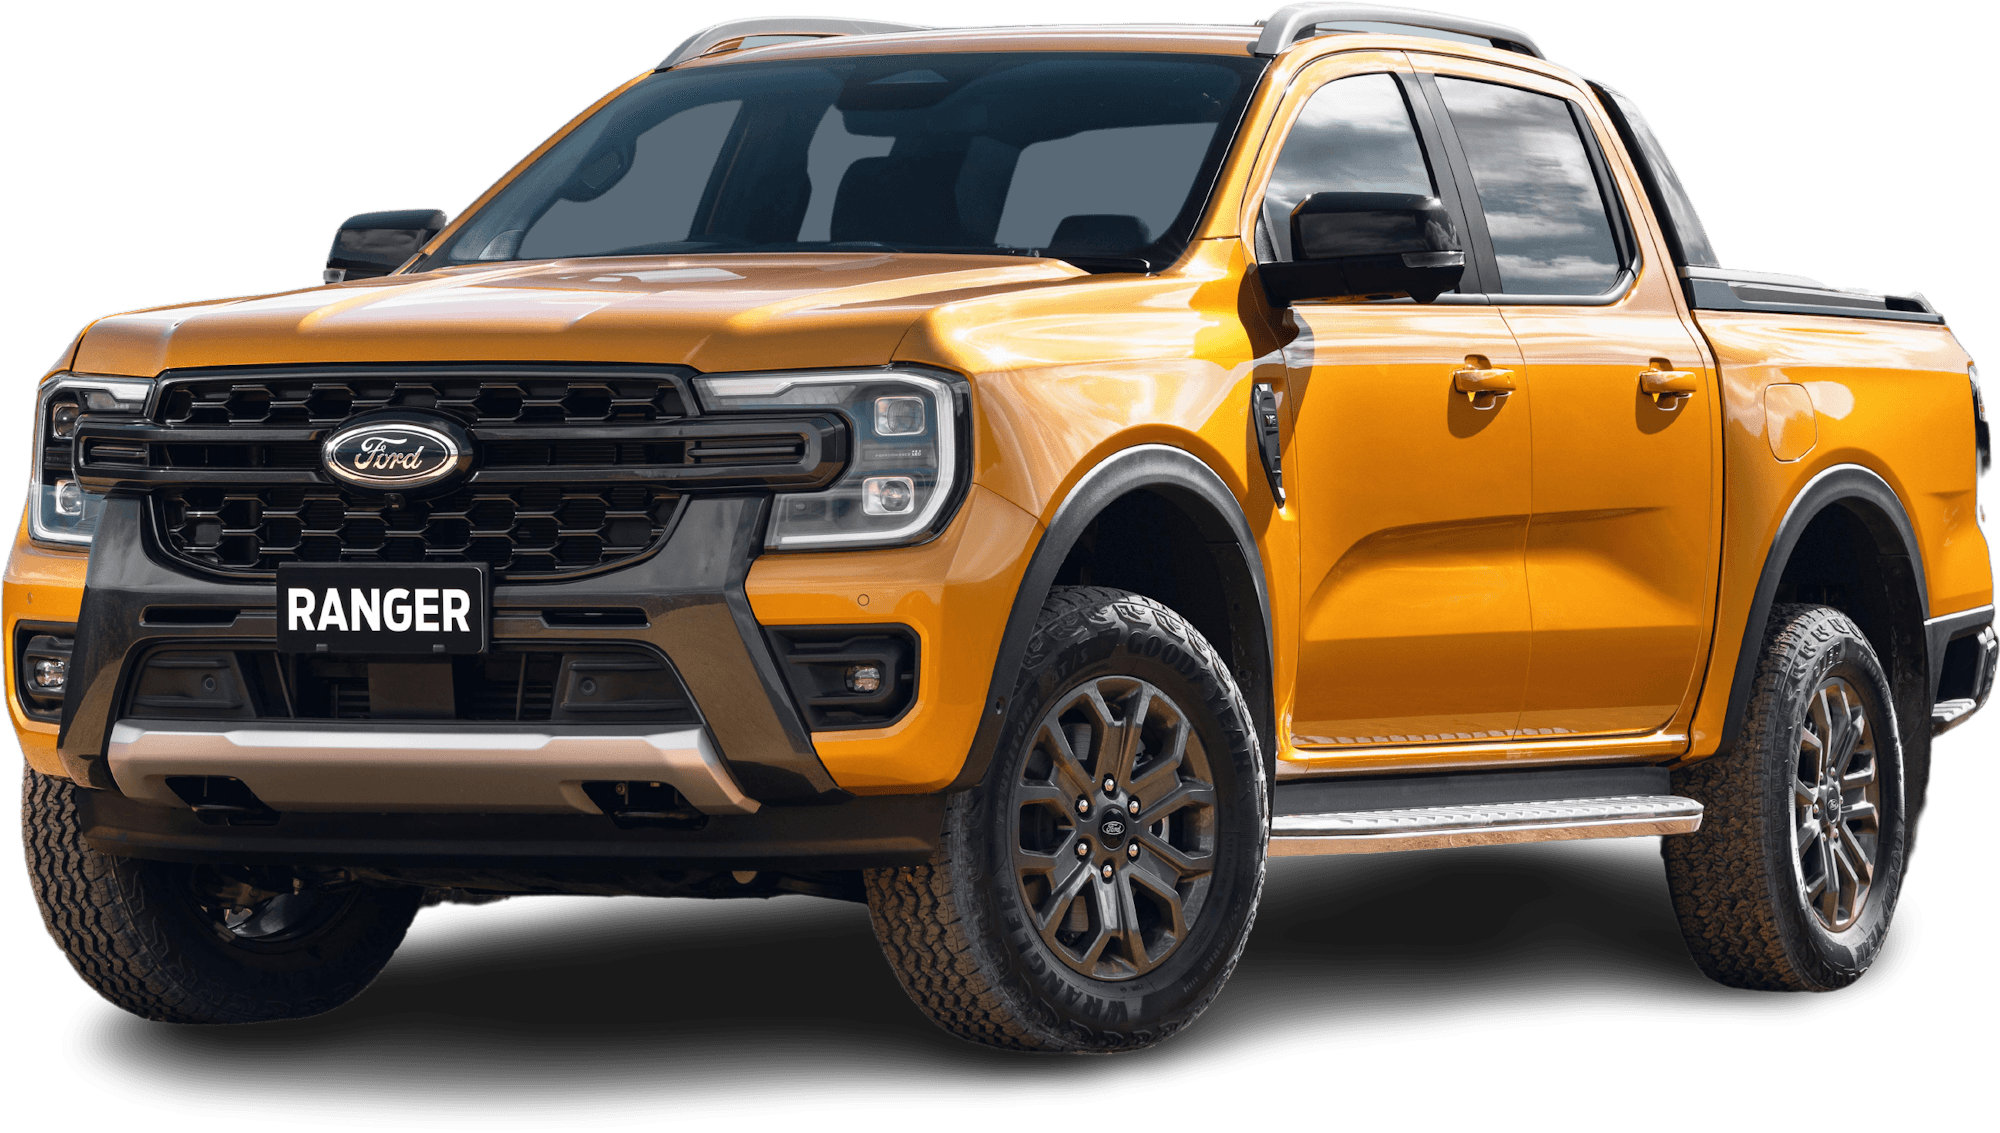 Find your best Ford Ranger finance rate with Driva